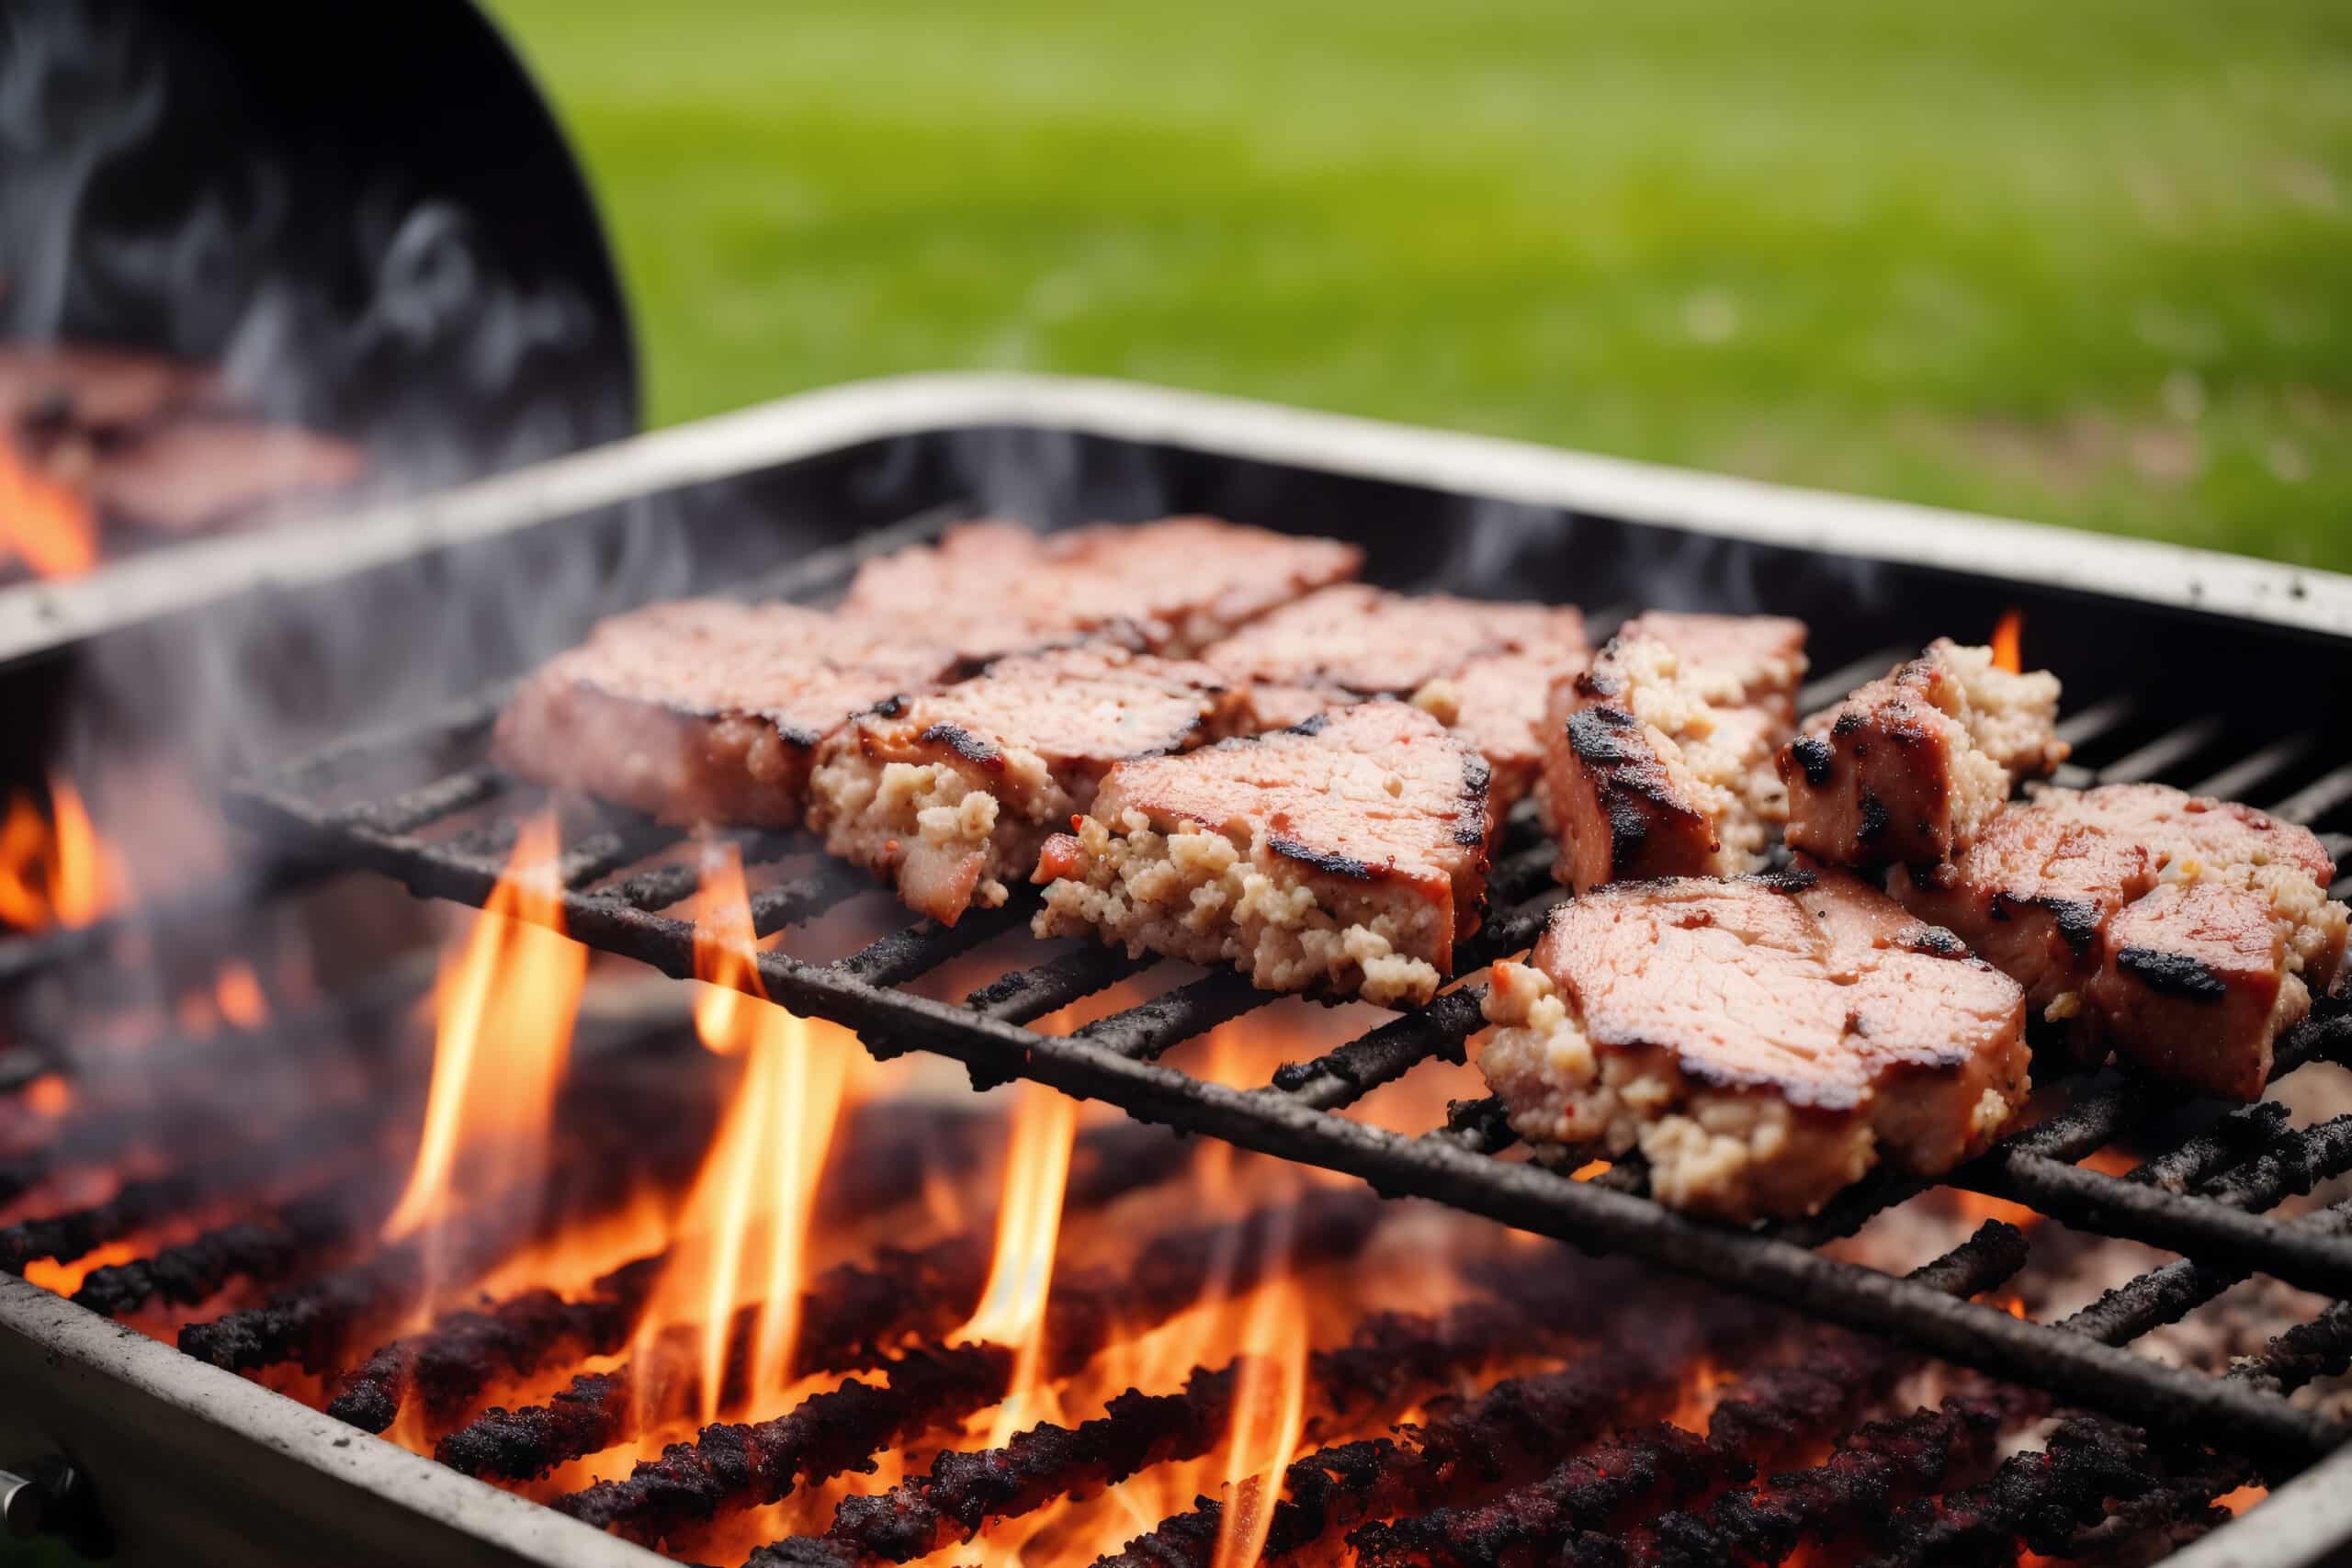 www.appr.com : Can You Convert A Propane Grill To Natural Gas?